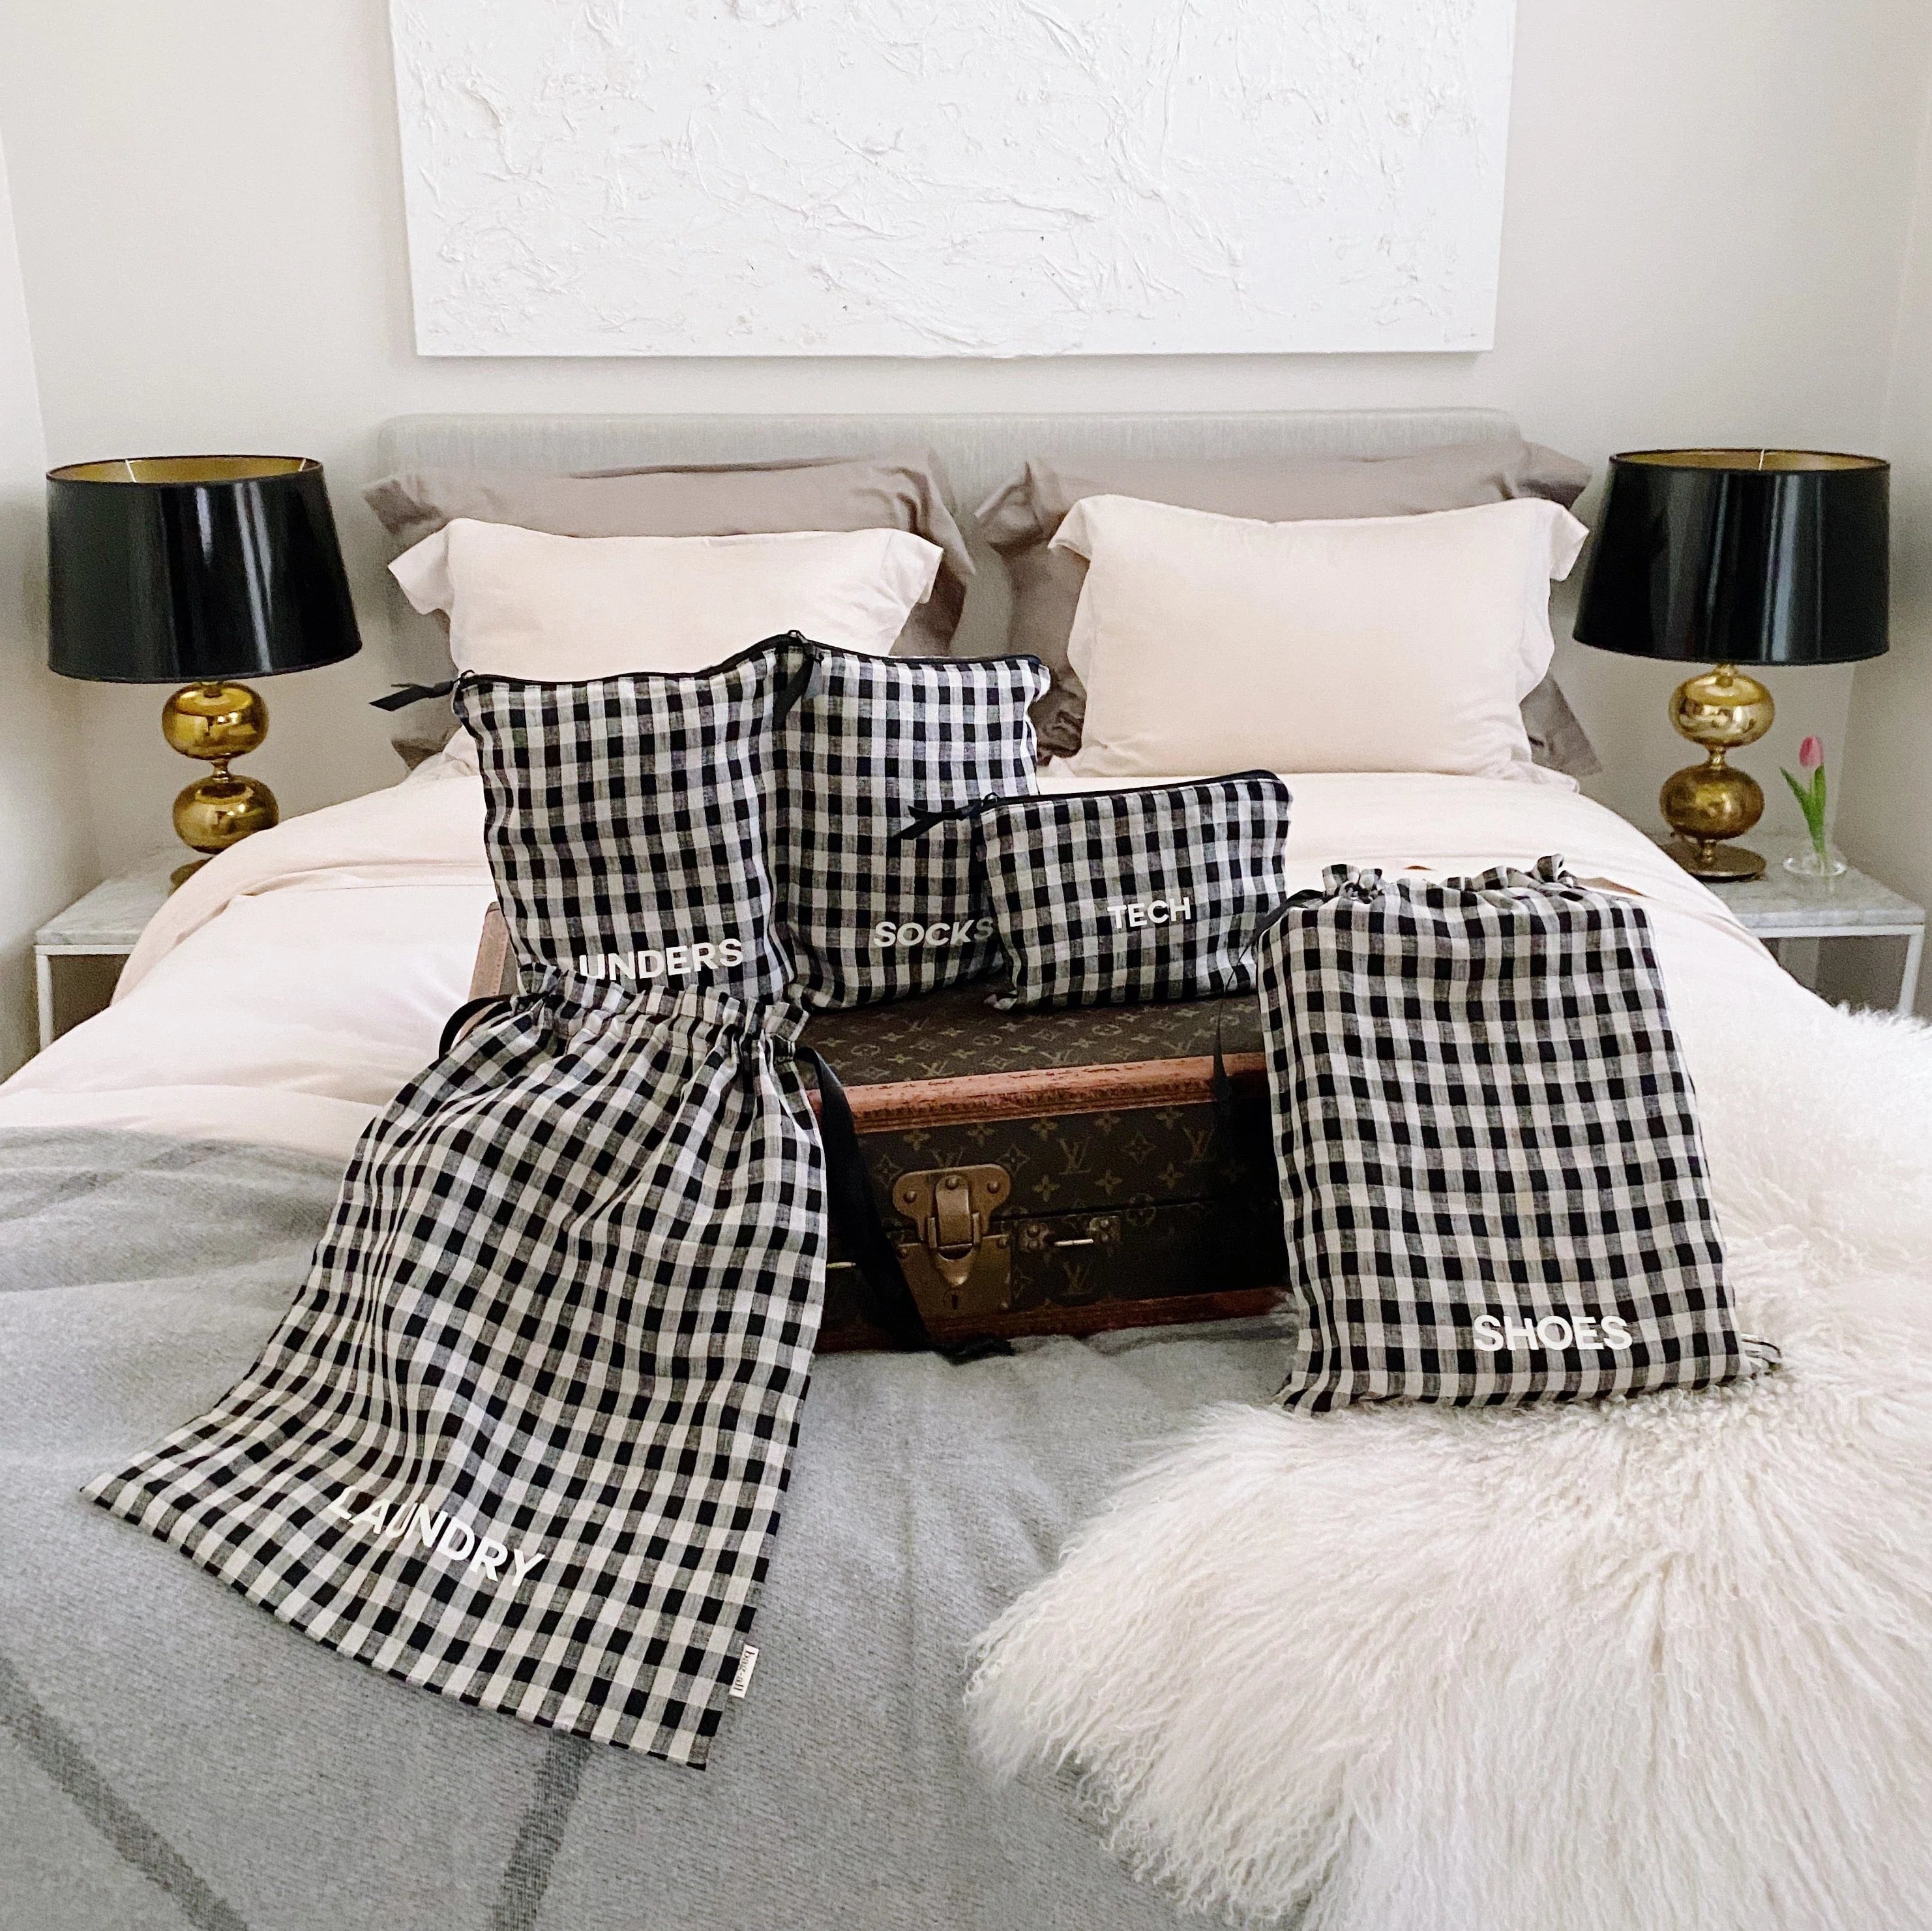 Gingham Travel Set of Four - NEW